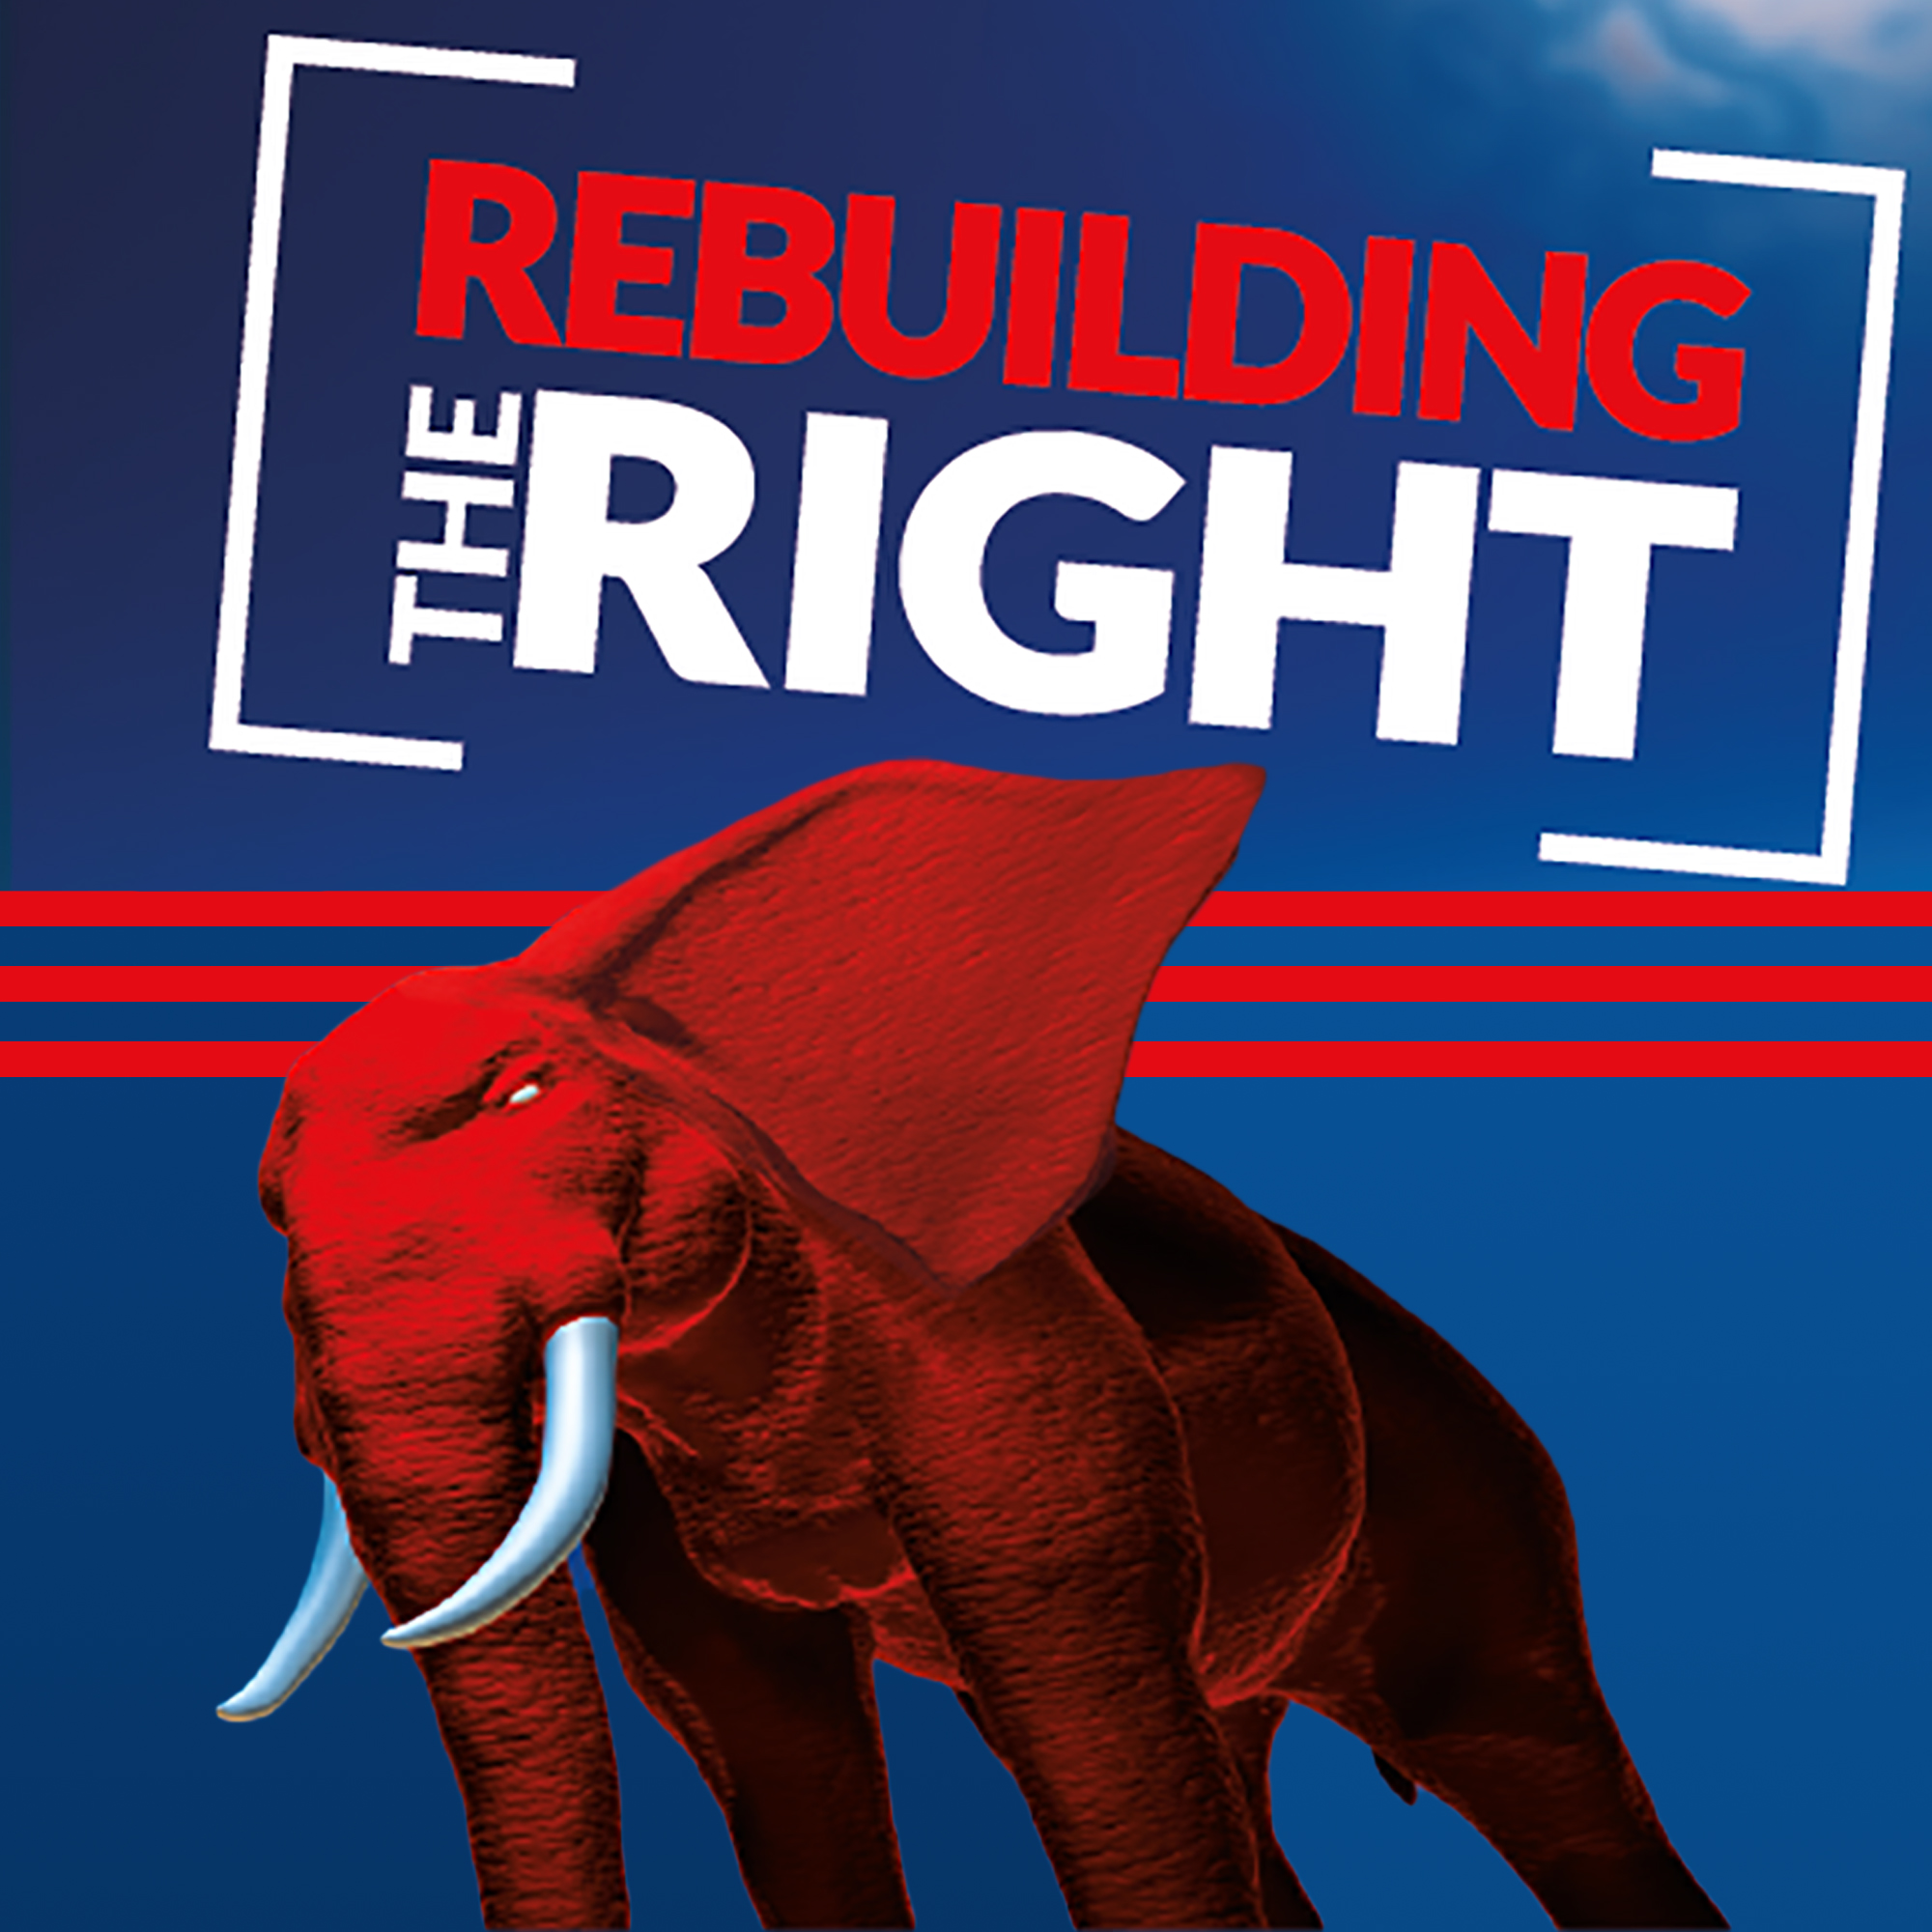 Rebuilding the Right 4-14-21: Mike Gallagher and Dinesh D'Souza